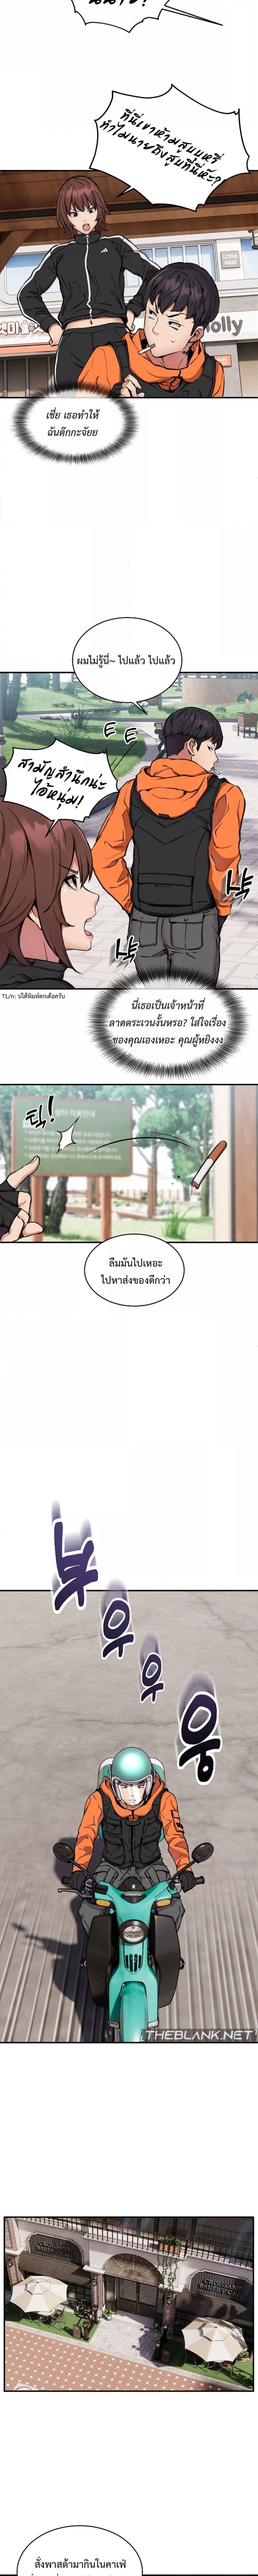 Driver in the New City ตอนที่ 7 ภาพ 5